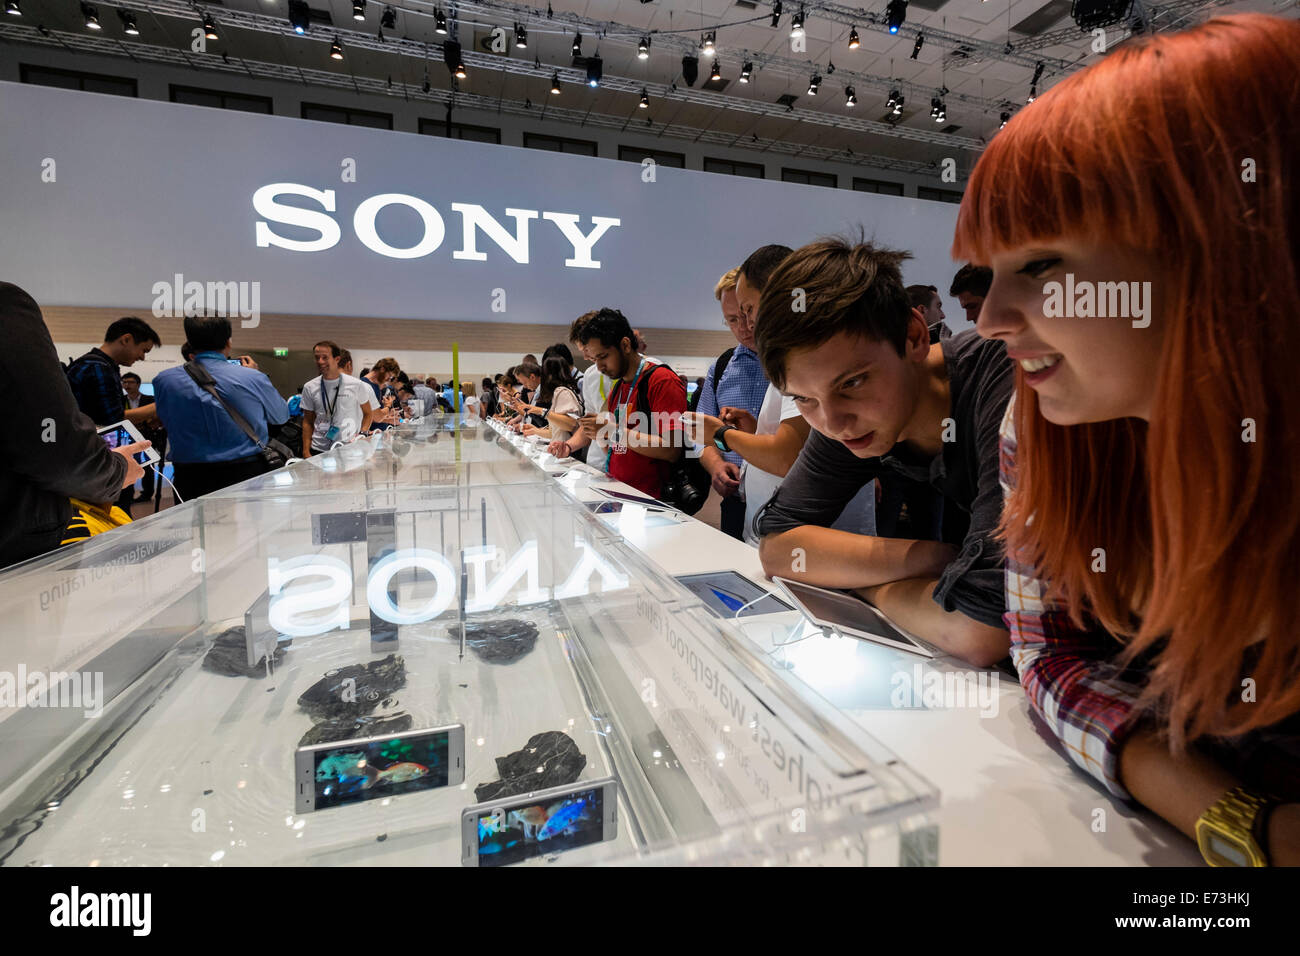 Berlin, Germany. 5th September, 2014. Visitors to Sony stand examine waterproof Xperia tablets and smart phones in water tank at IFA 2014 consumer electrical show in Berlin Credit:  Iain Masterton/Alamy Live News Stock Photo